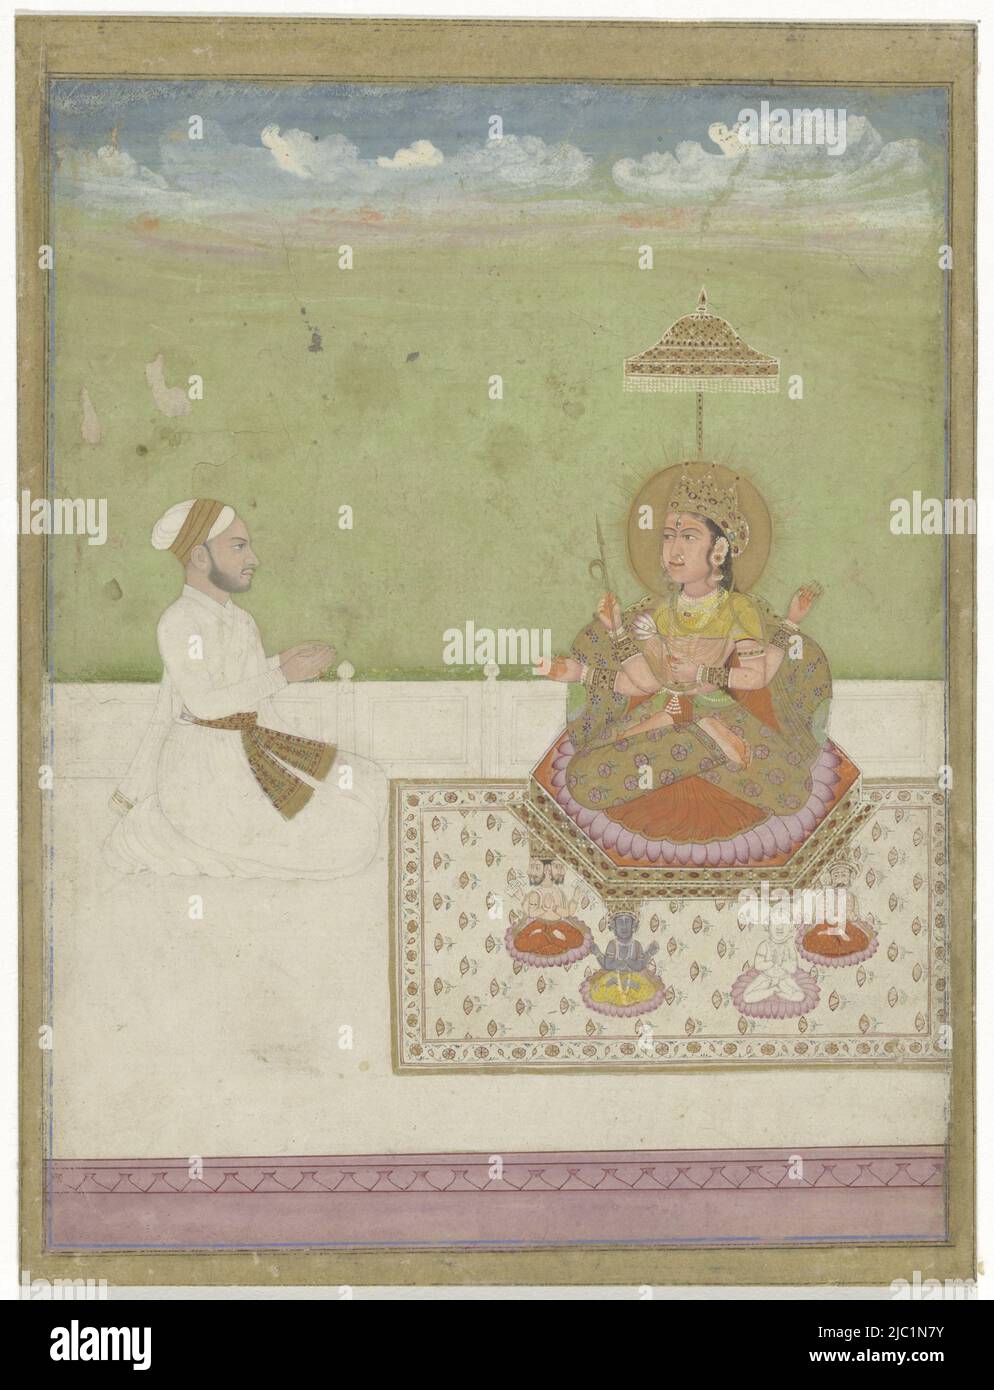 The goddess with two pairs of arms and sitting on a throne of which the legs are made up of gods, a man in white attire is kneeling in front of her, behind the white terrace with lilac underneath a green surface with a blue, white-cloudy sky. Around the picture framing lines in blue and black and a narrow gold-colored piping, Devi on throne with gods as legs., draughtsman: anonymous, Guler, 1750 - 1770, paper, brush, h 228 mm × w 172 mm, h 207 mm × w 163 mm Stock Photo